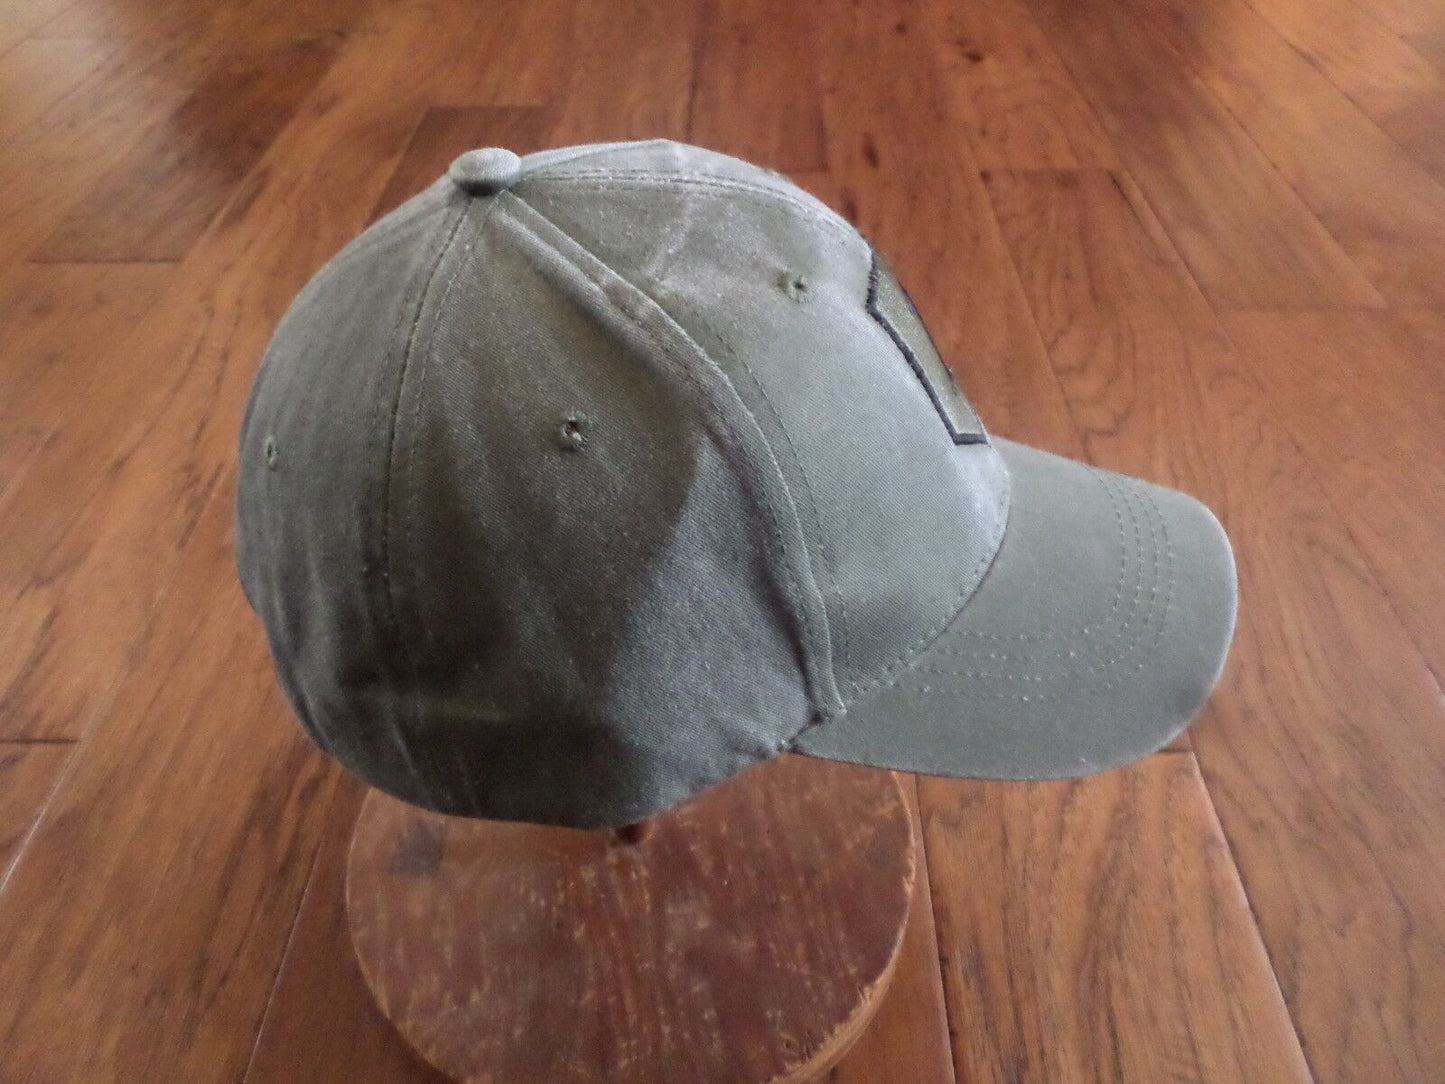 U.S MILITARY ARMY 1st INFANTRY DIVISION HAT STONEWASHED BASEBALL CAP